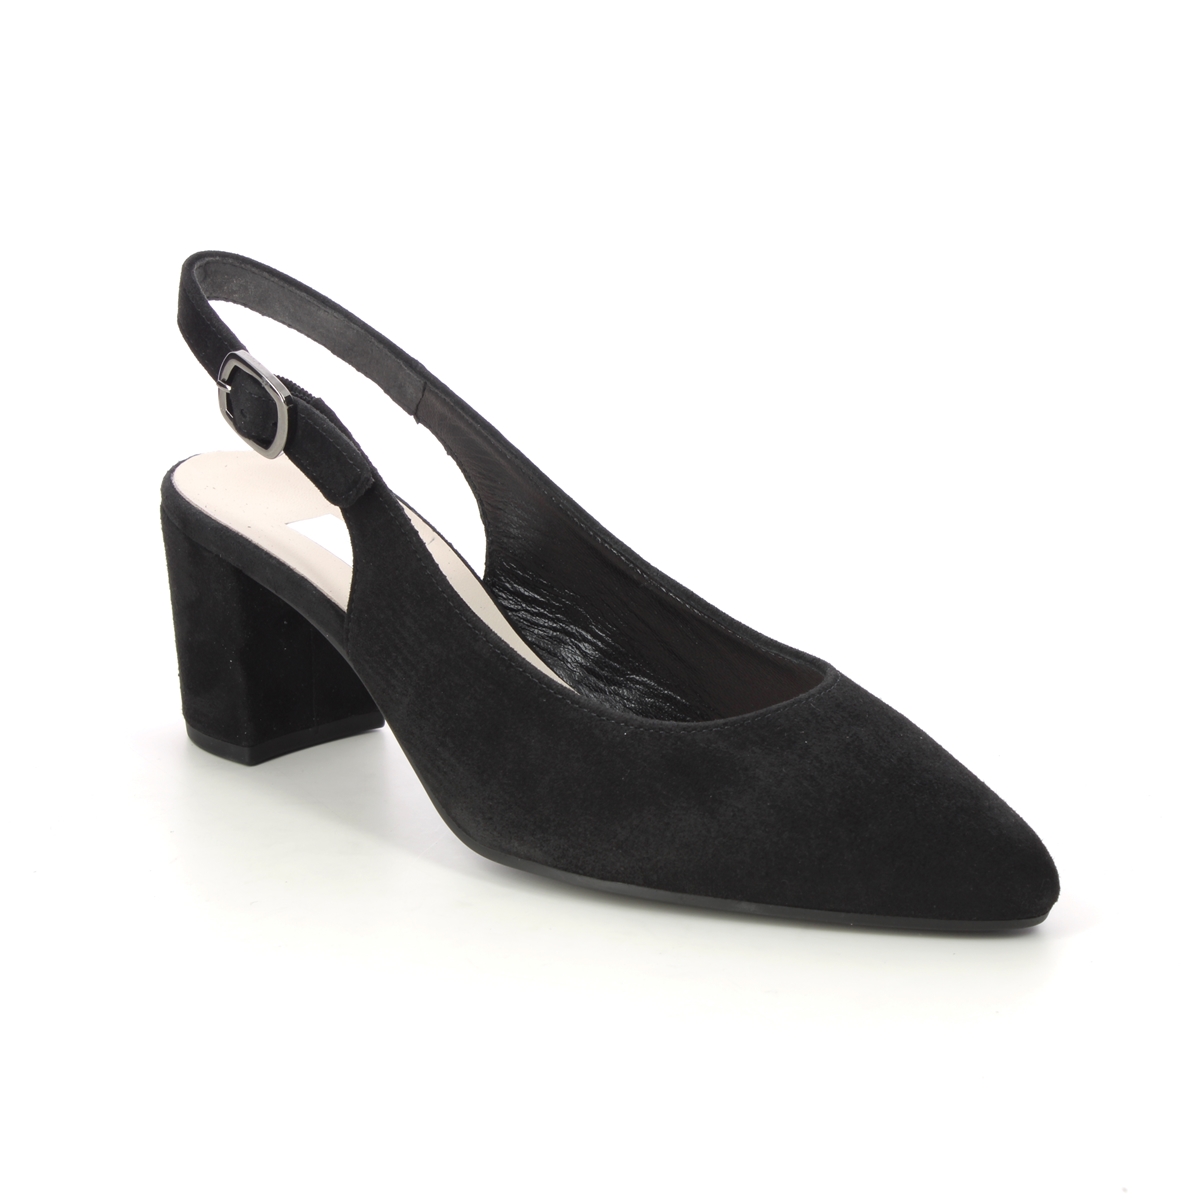 Gabor Helmsdale Black Suede Womens Slingback Shoes 41.540.17 in a Plain Leather in Size 5.5